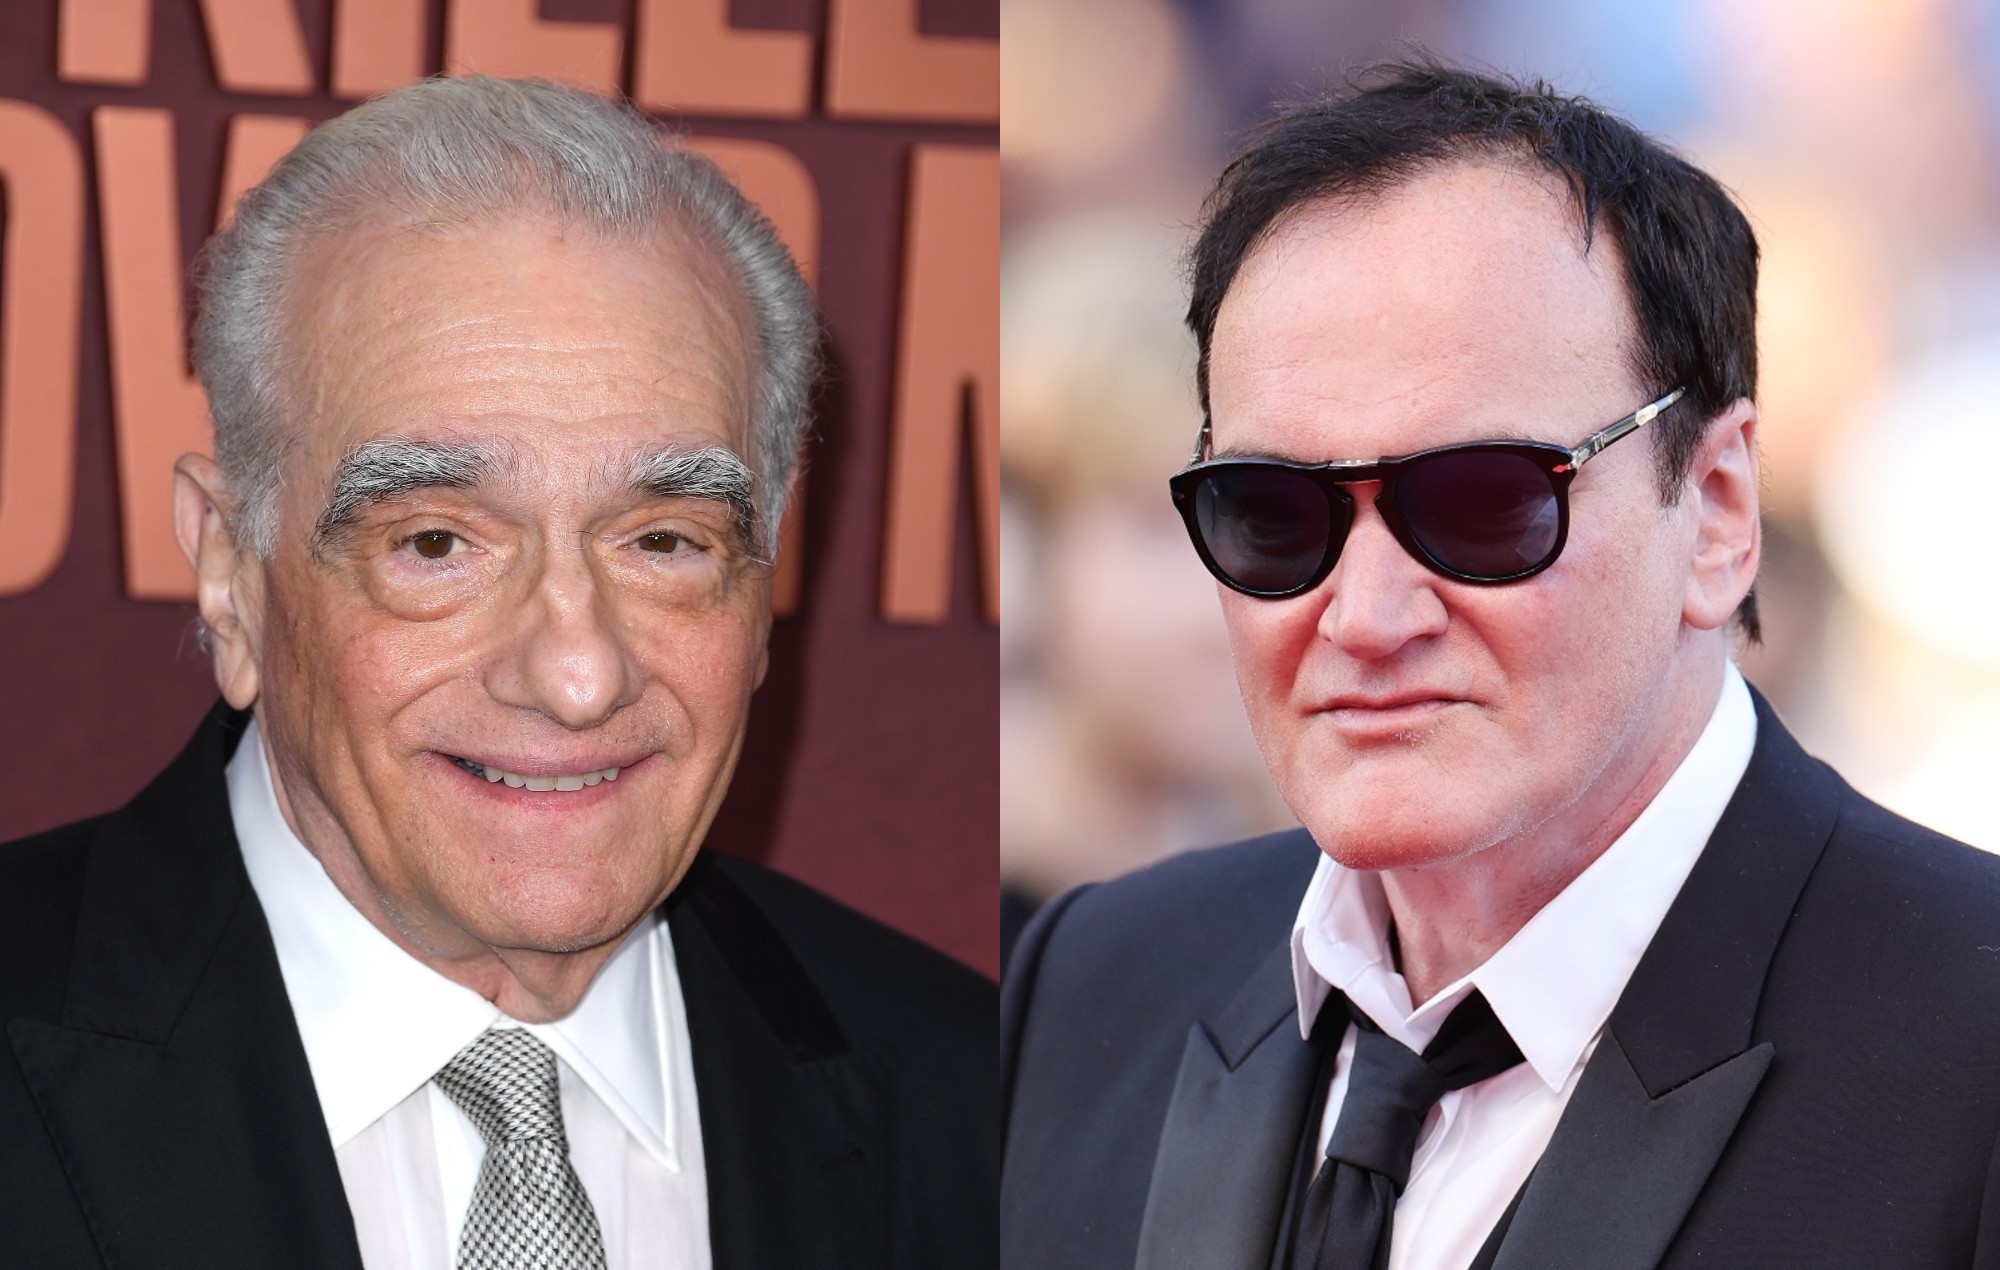 Martin Scorsese shares his thoughts on Quentin Tarantino’s retirement plan